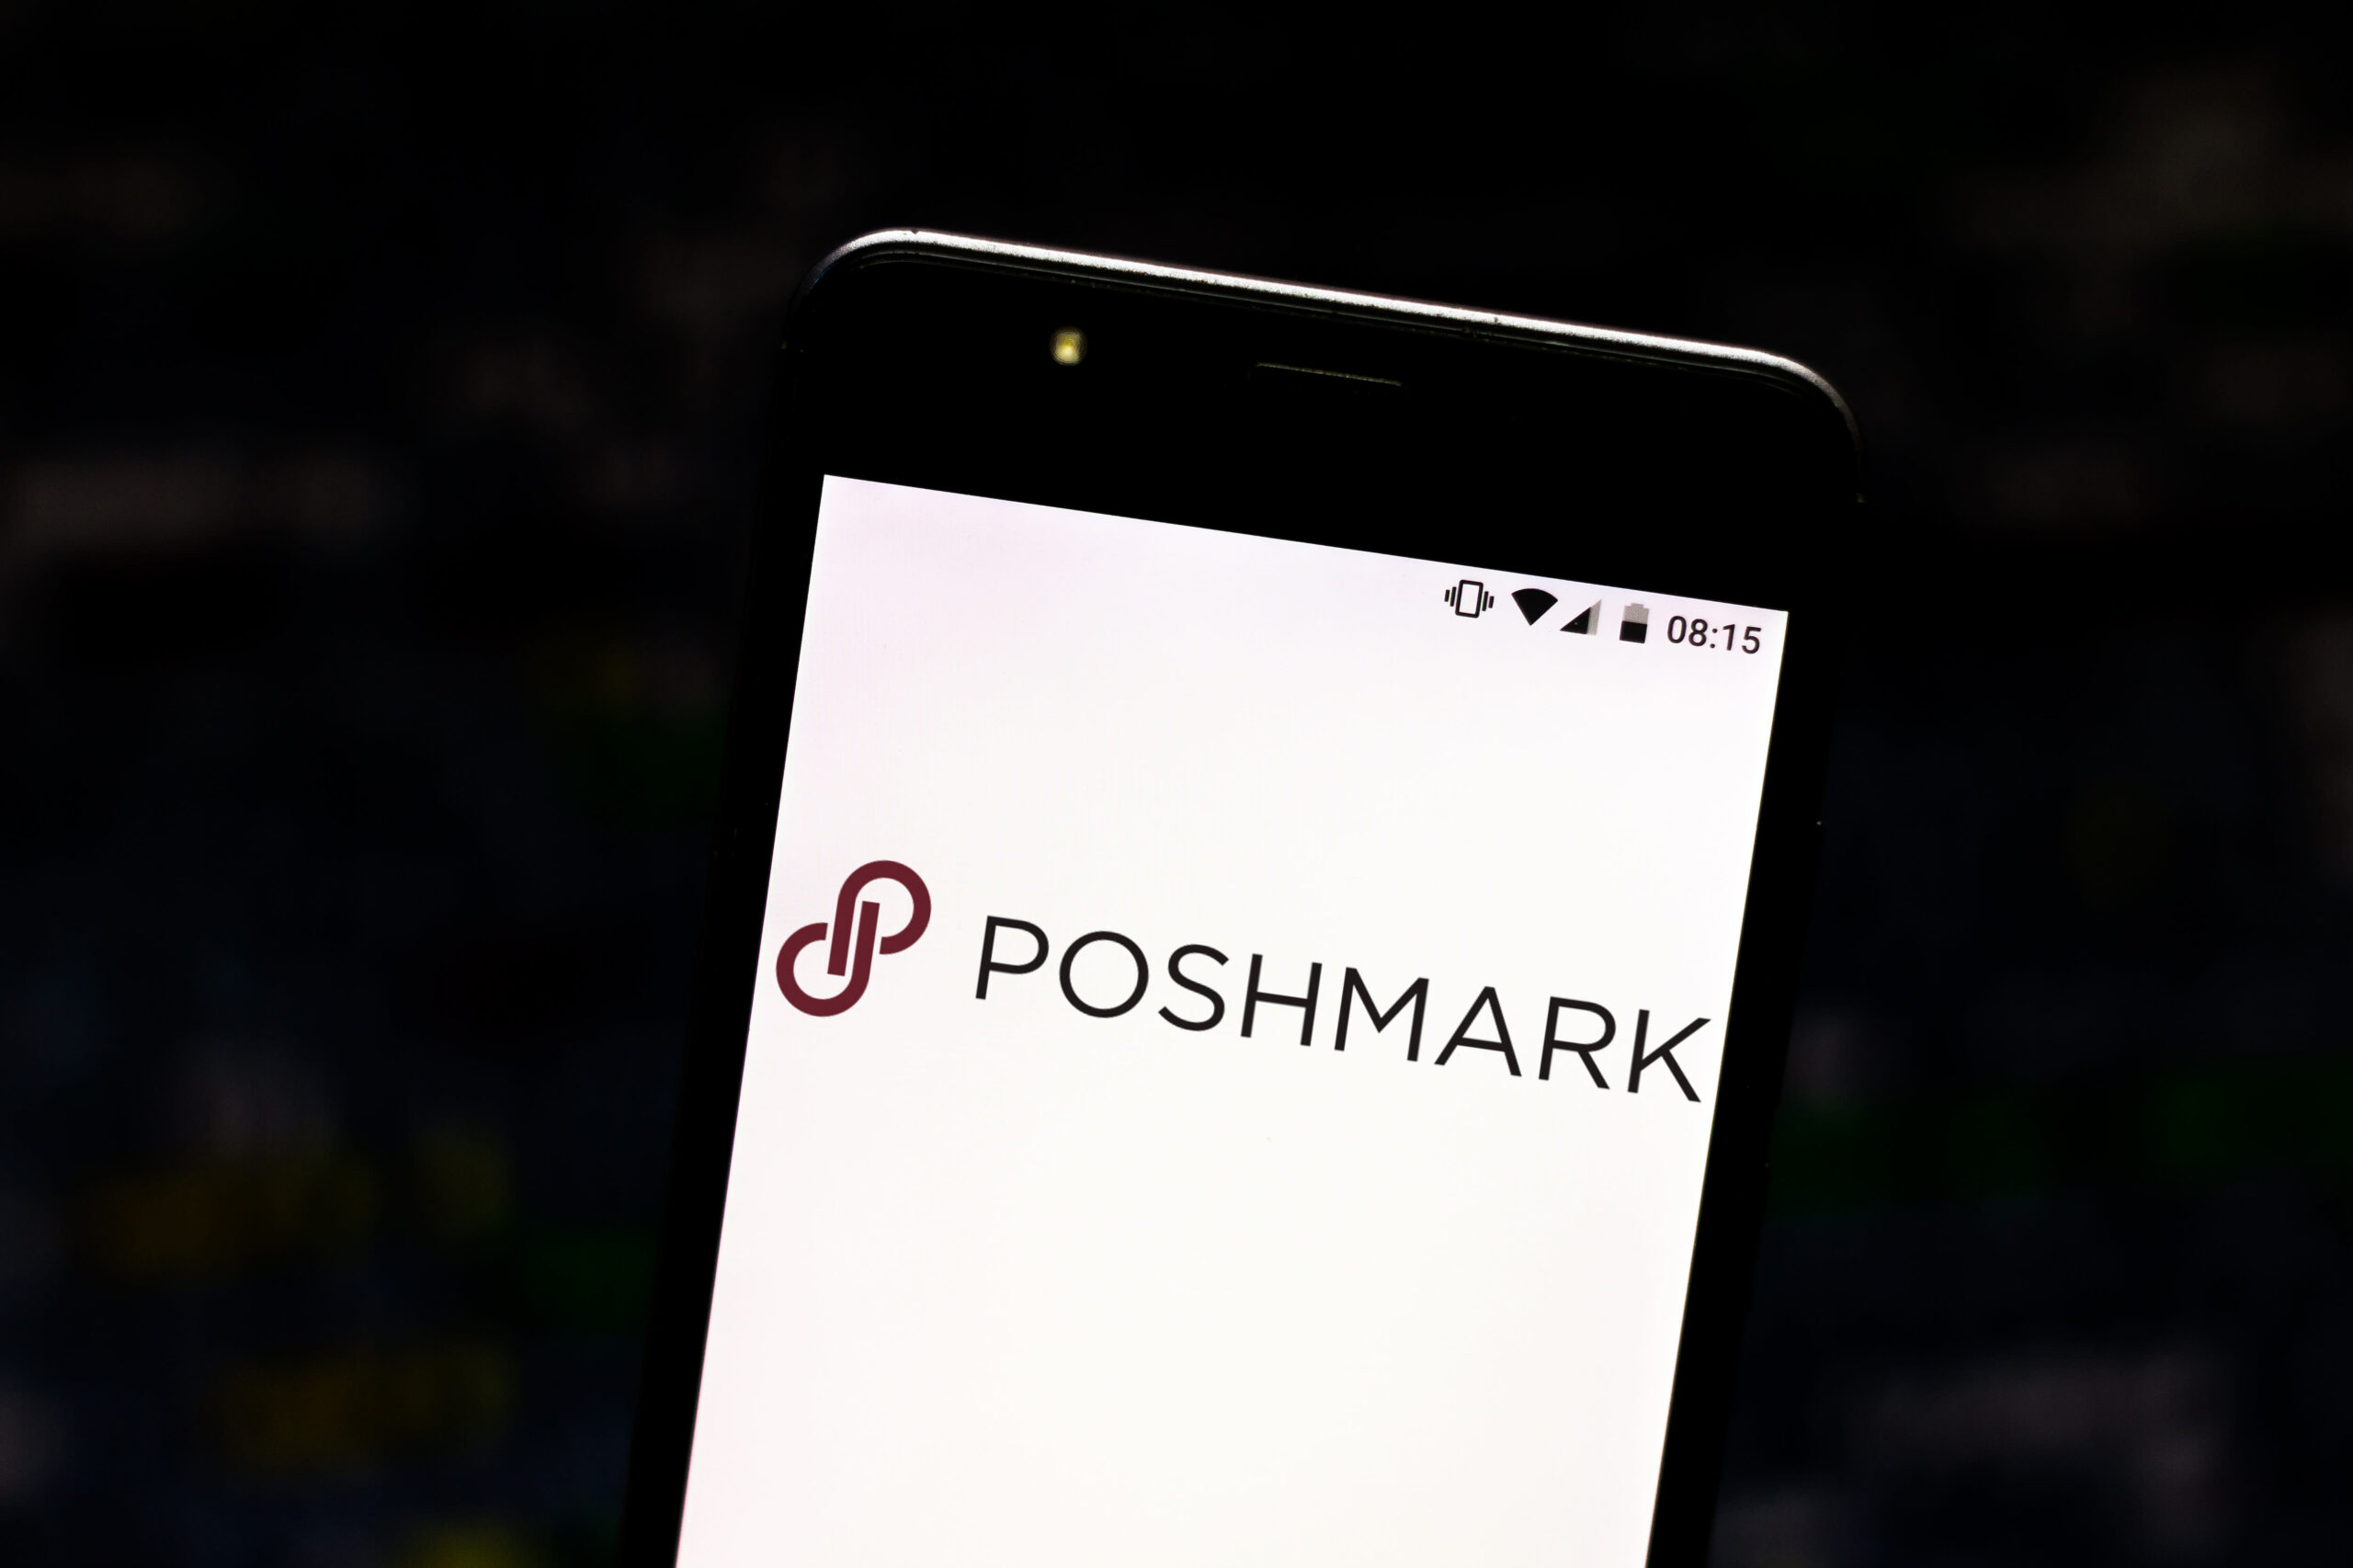 Poshmark (POSH) This fall 2020 earnings, first since IPO